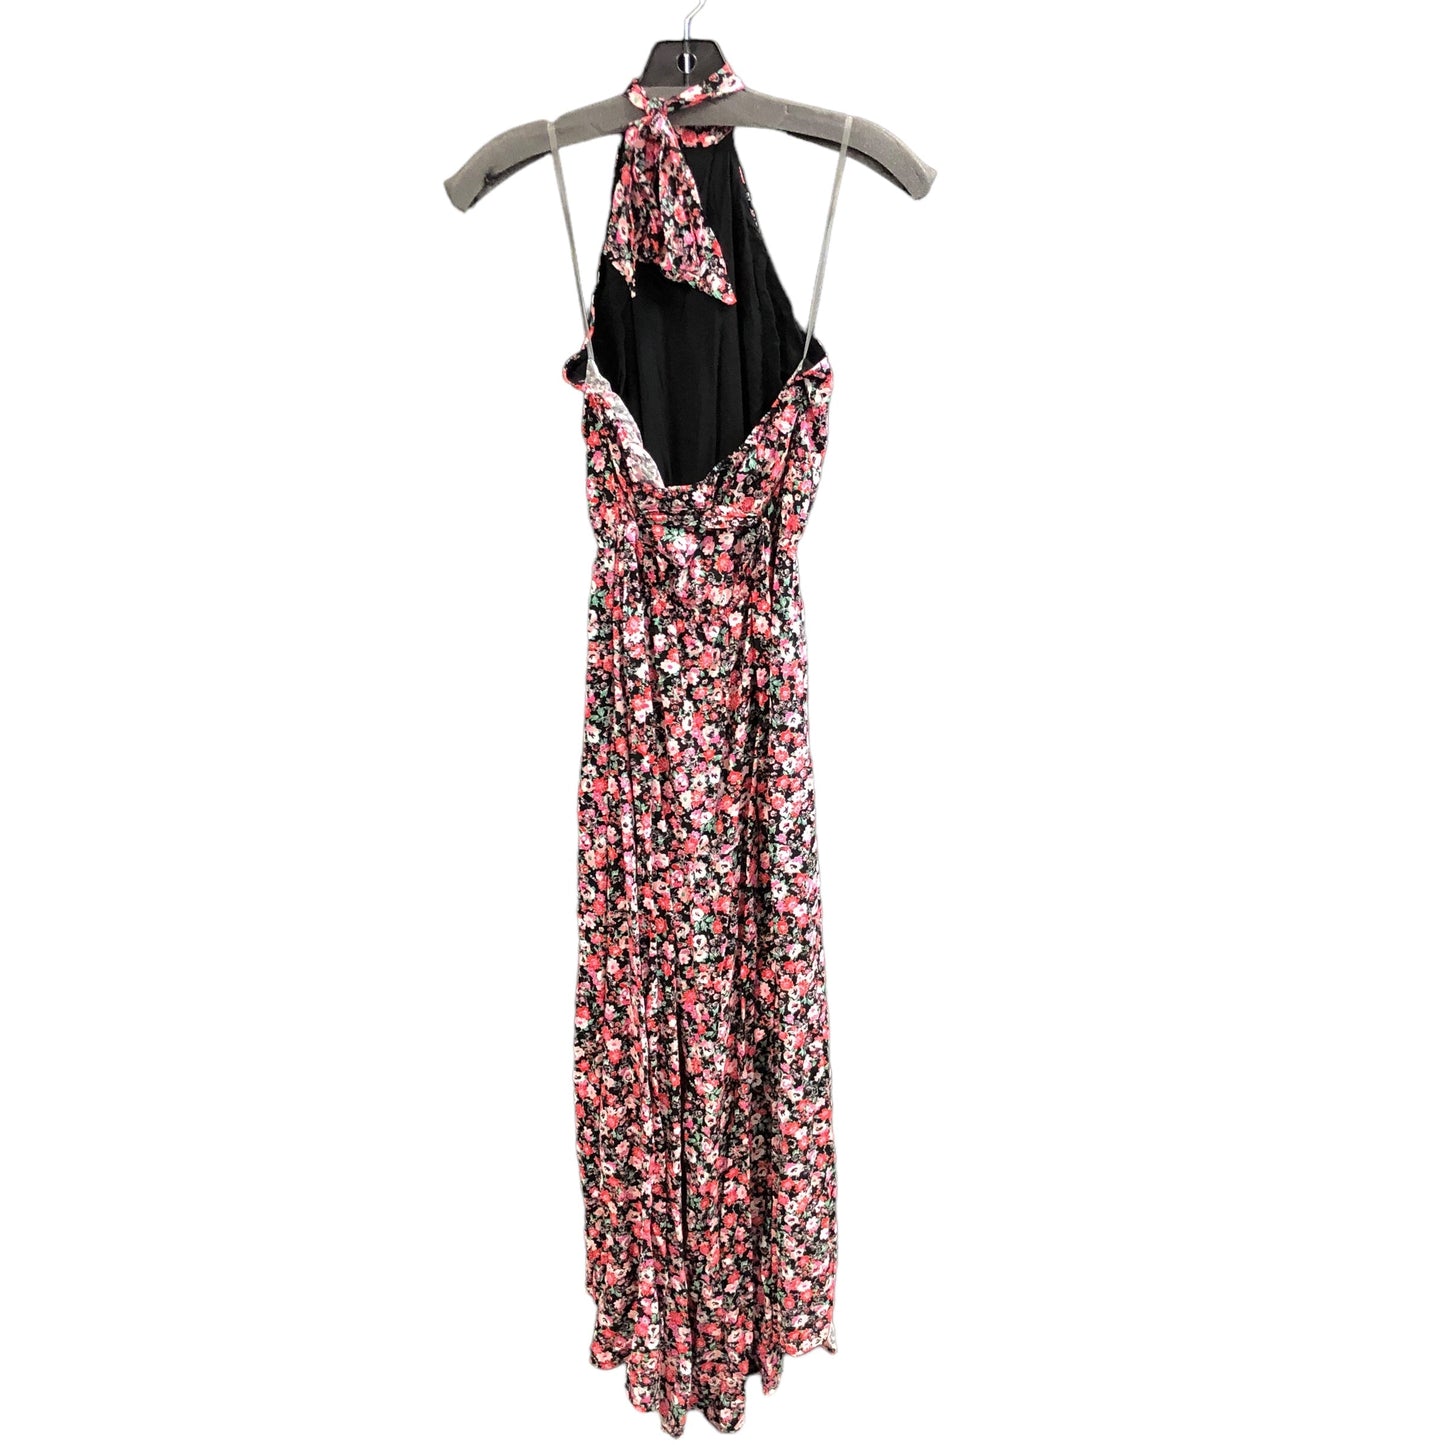 Floral Print Dress Casual Maxi Nine eight, Size S